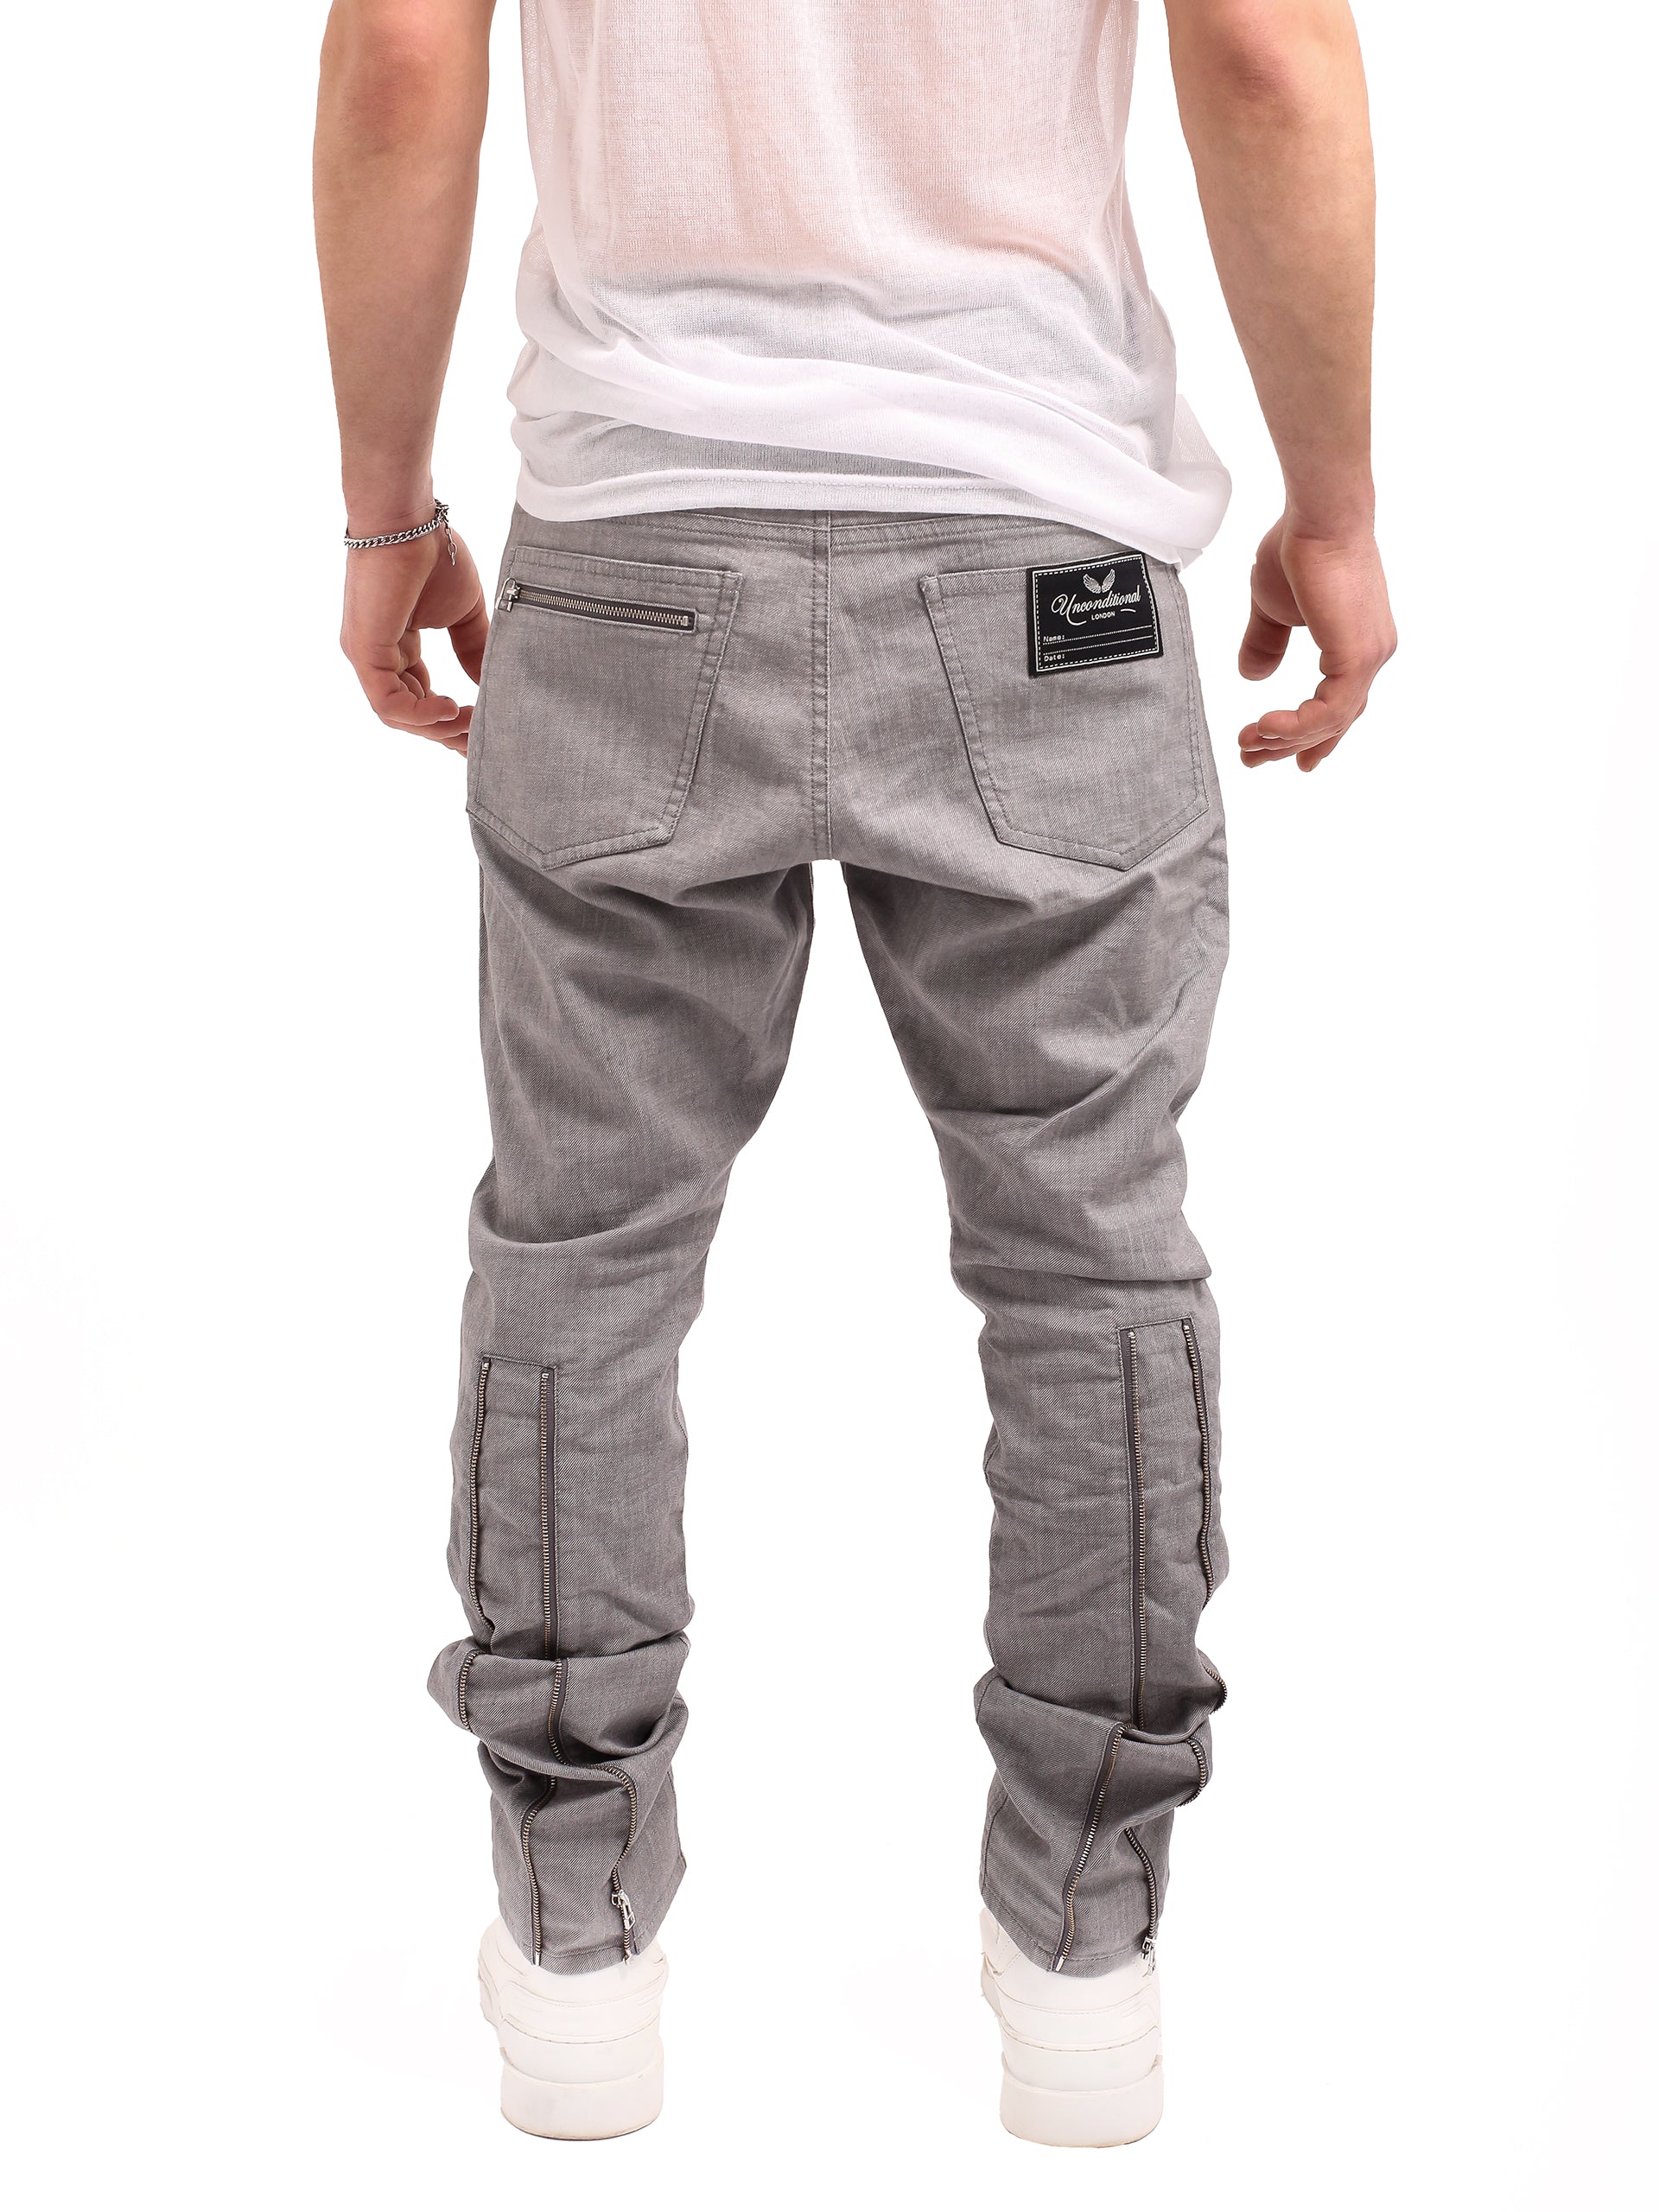 GREY STRAIGHT LEG JEANS WITH ZIP DETAIL